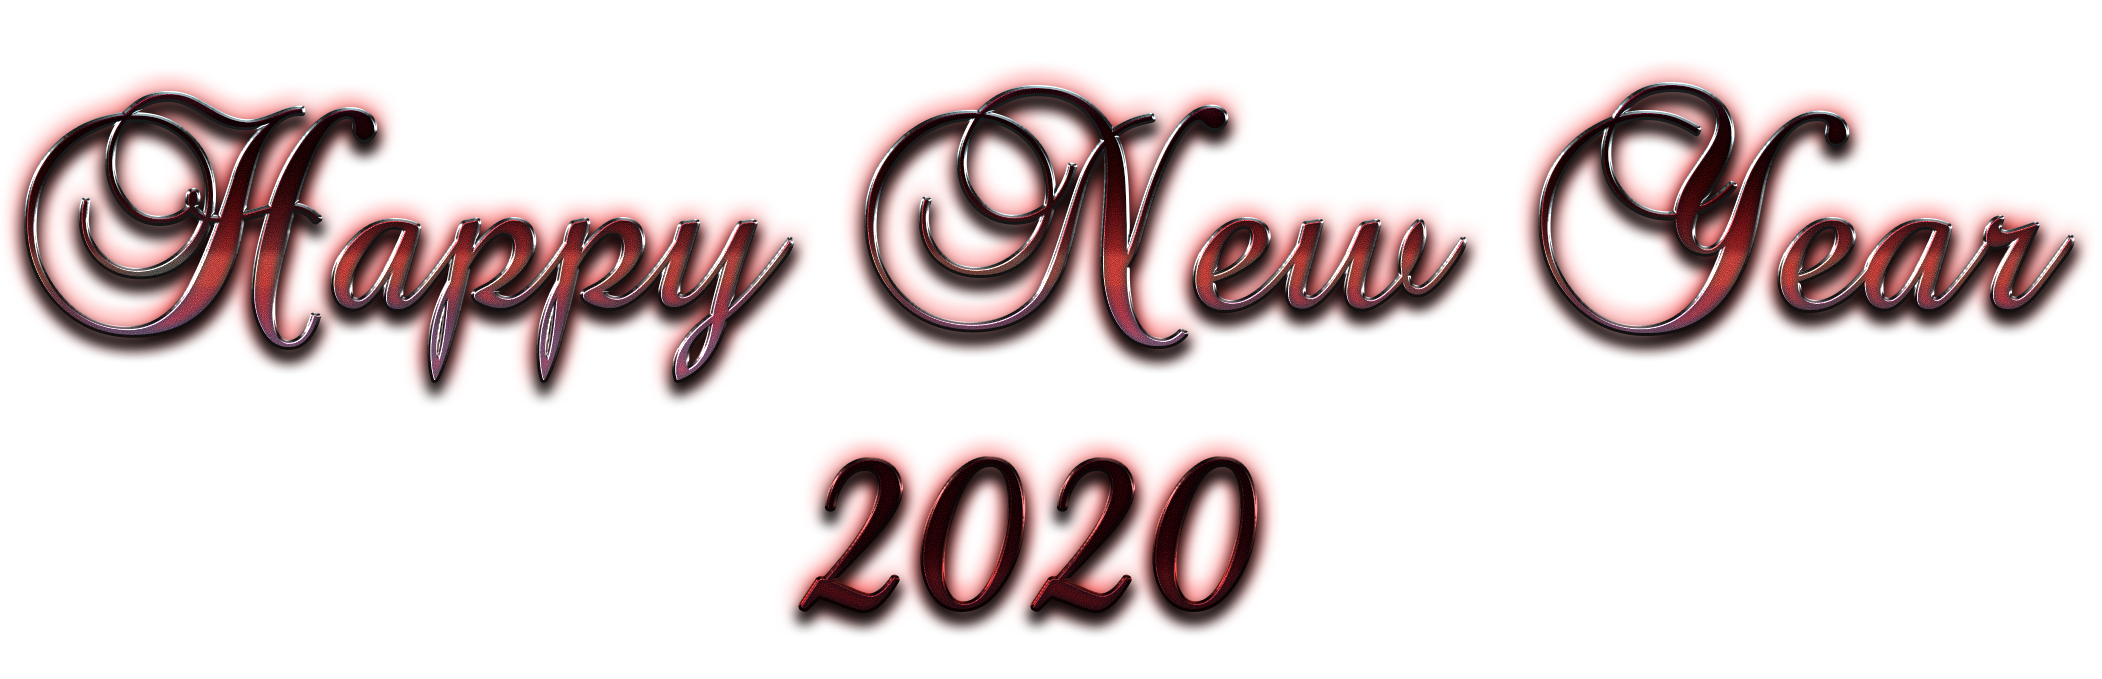 Happy New Year 2020 Transparent Background